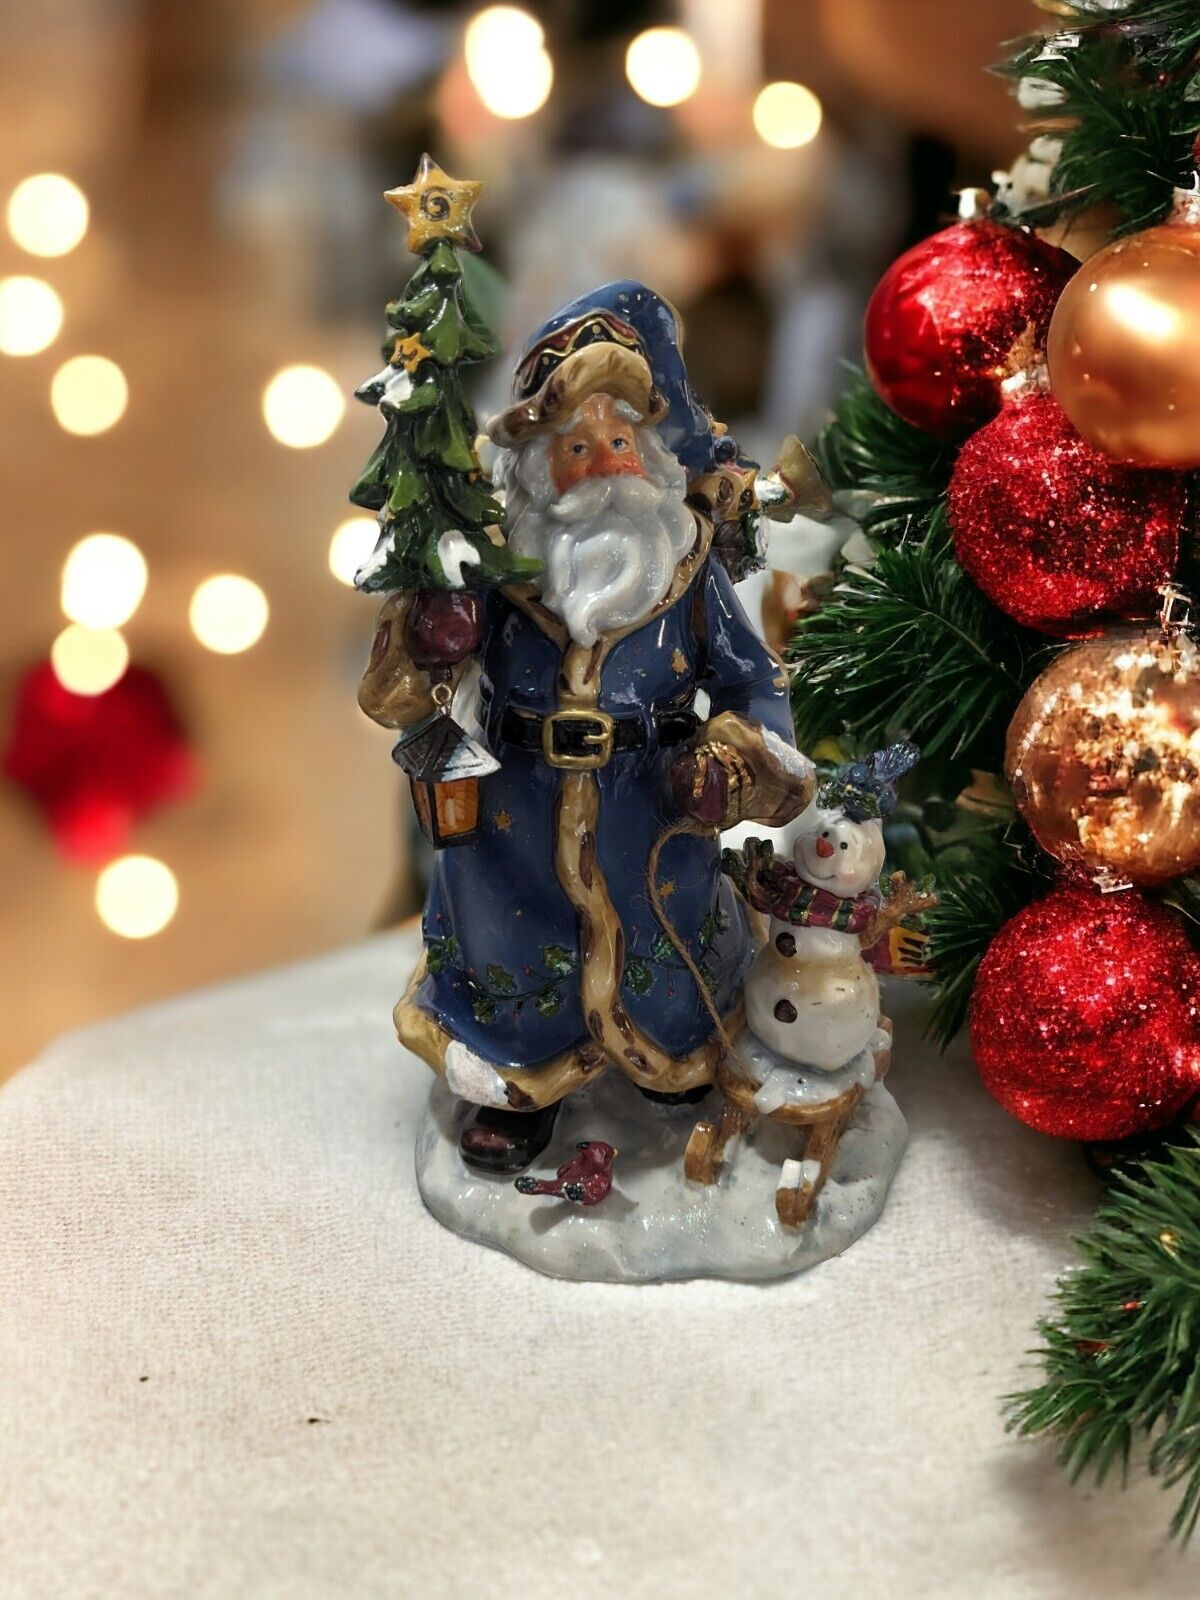 Old Fashioned Santa Figurine With Blue Coat And Hat, Bag Of Toys, And A Snowman 